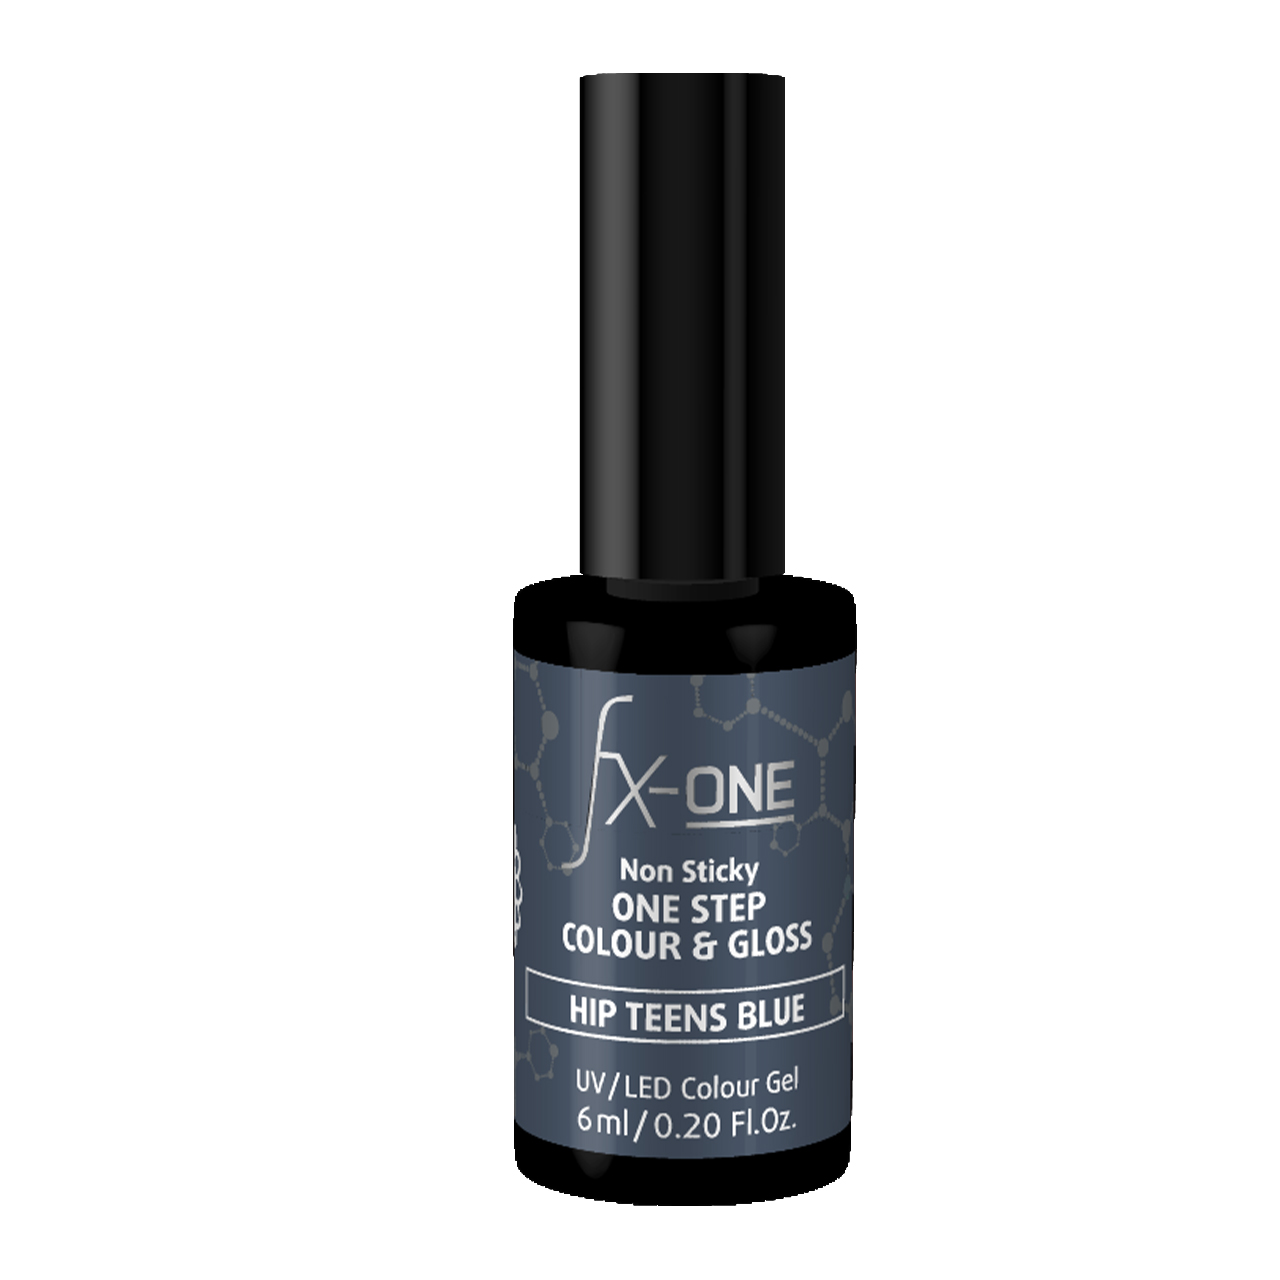 FX-ONE Colour & Gloss 6ml | | Blueberry 02-939 Muffin Blueberry Muffin